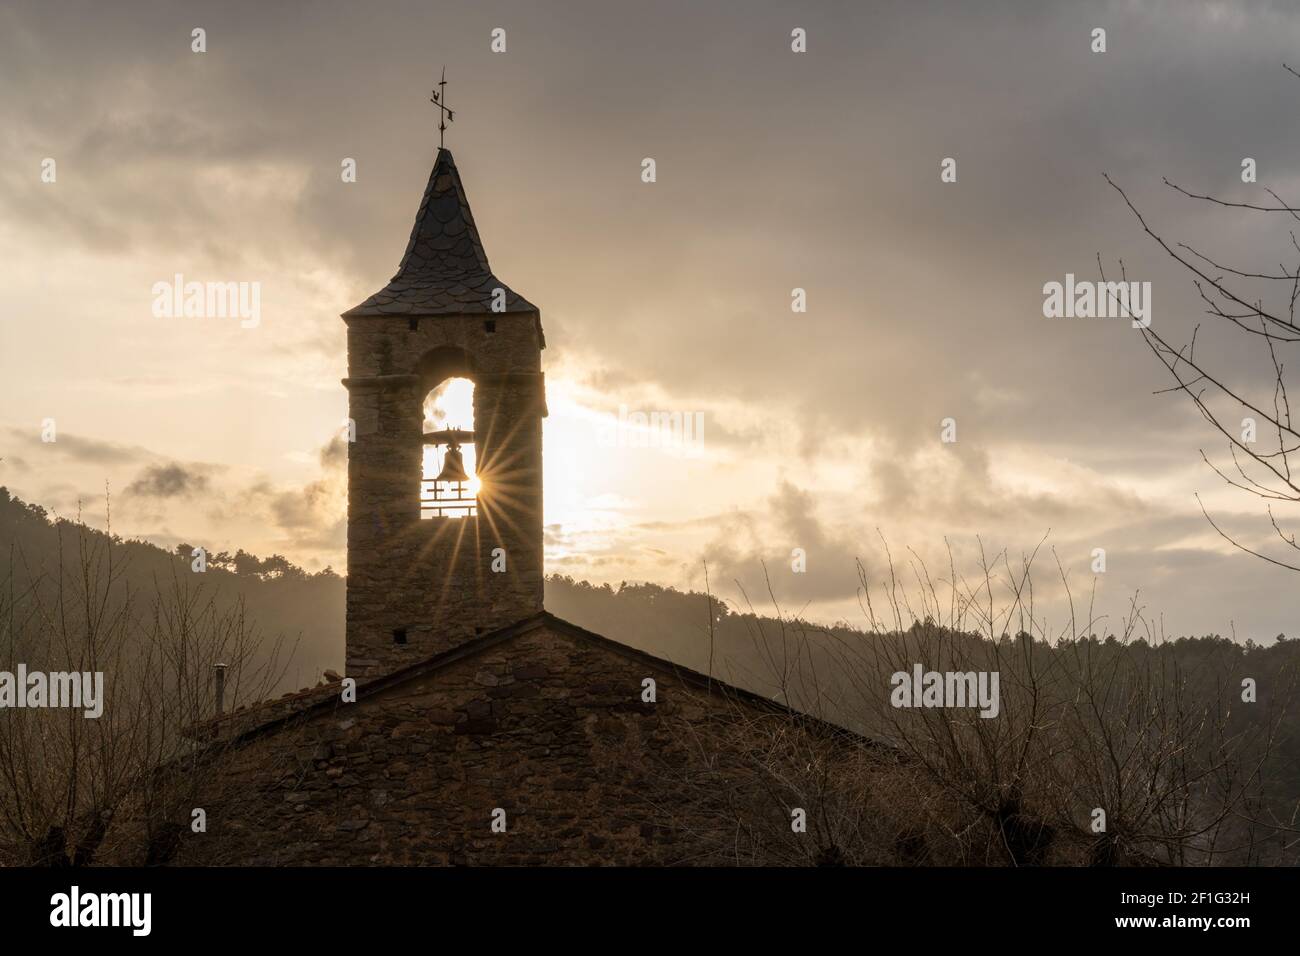 A massive stone mountain church with church steeple and sun star shining through under an overcast sky on a winter evening Stock Photo